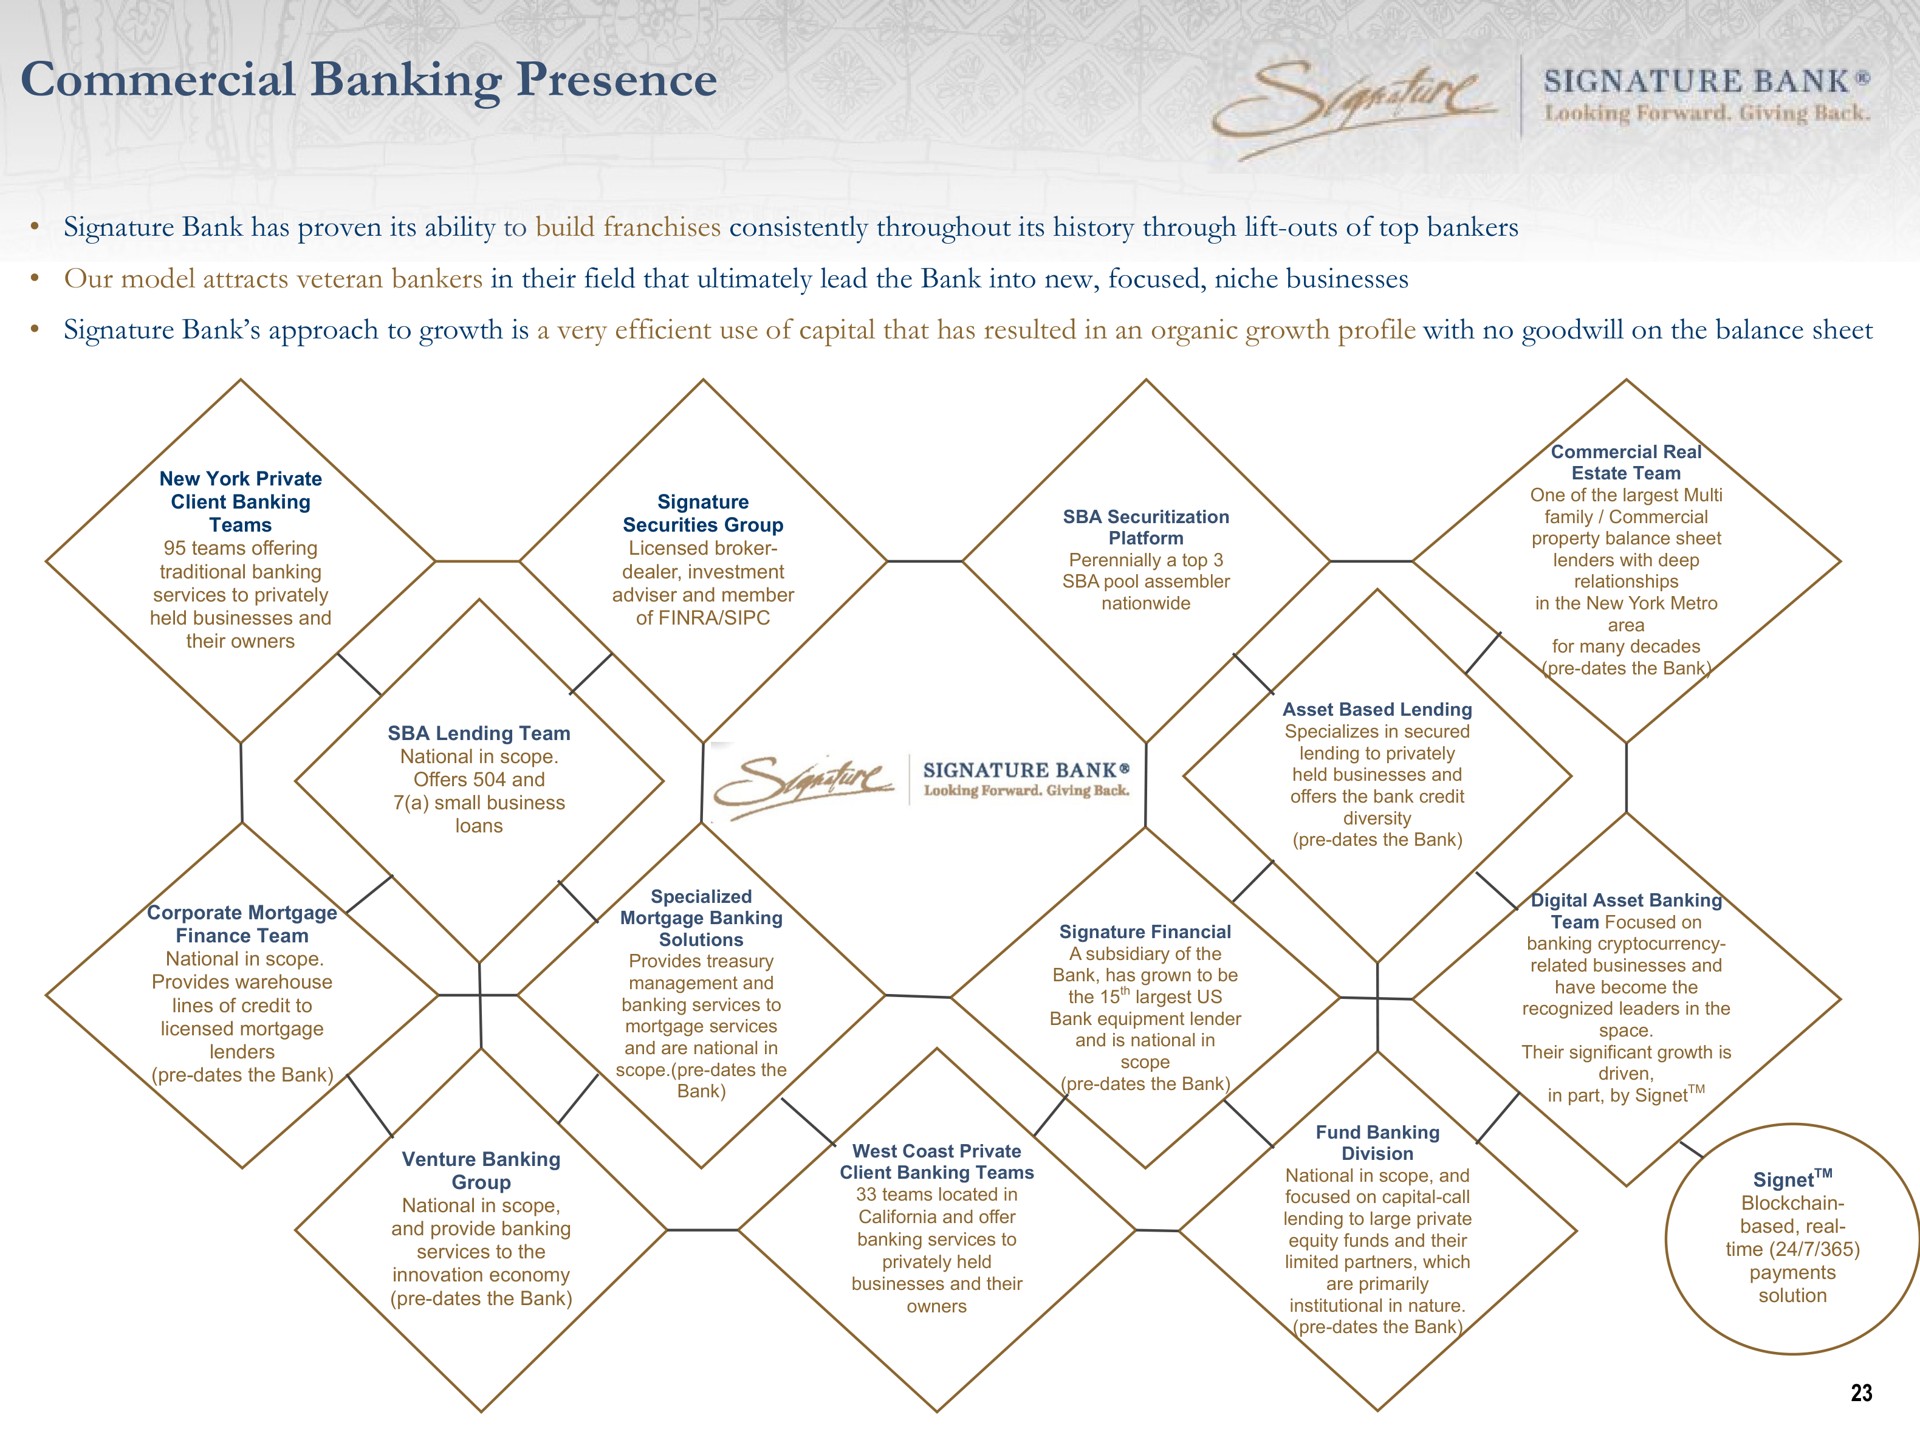 commercial banking presence | Signature Bank